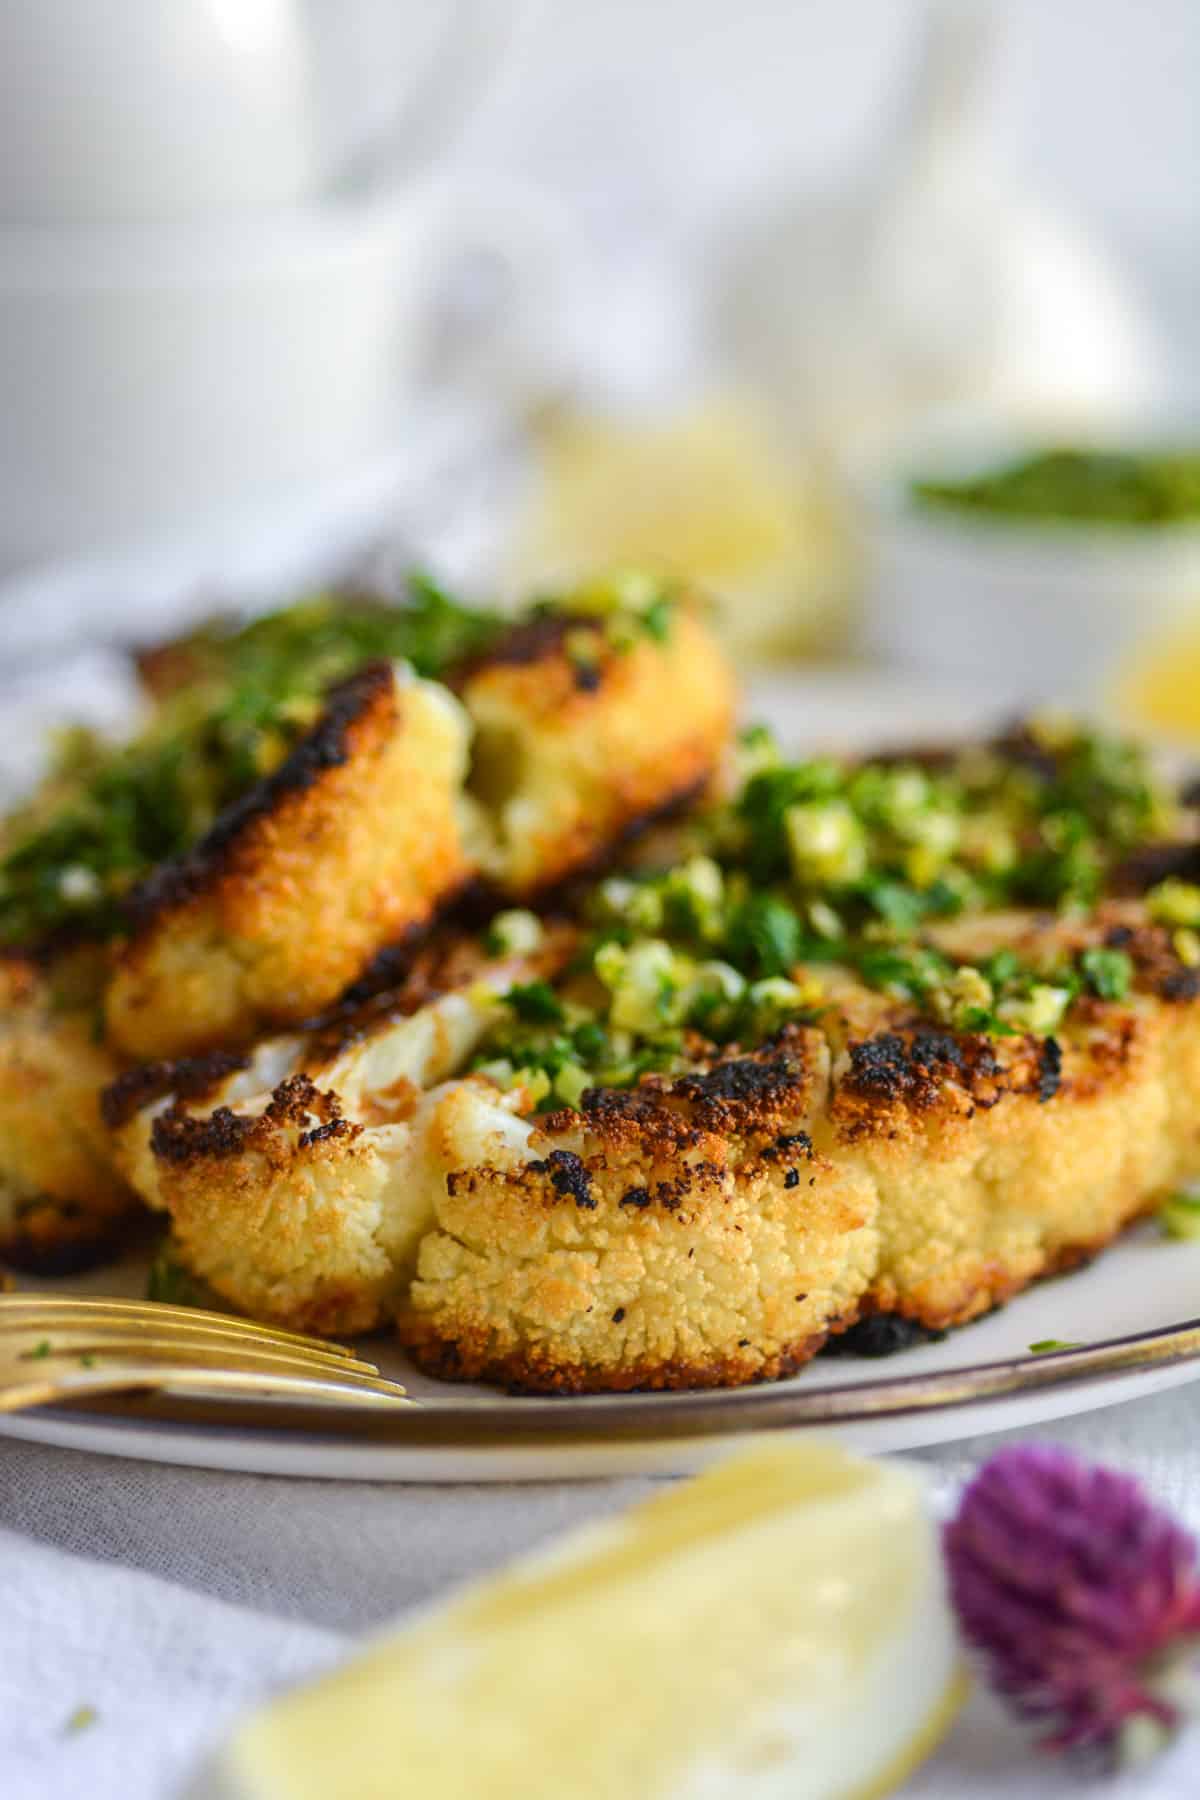 the side of the cauliflower steaks